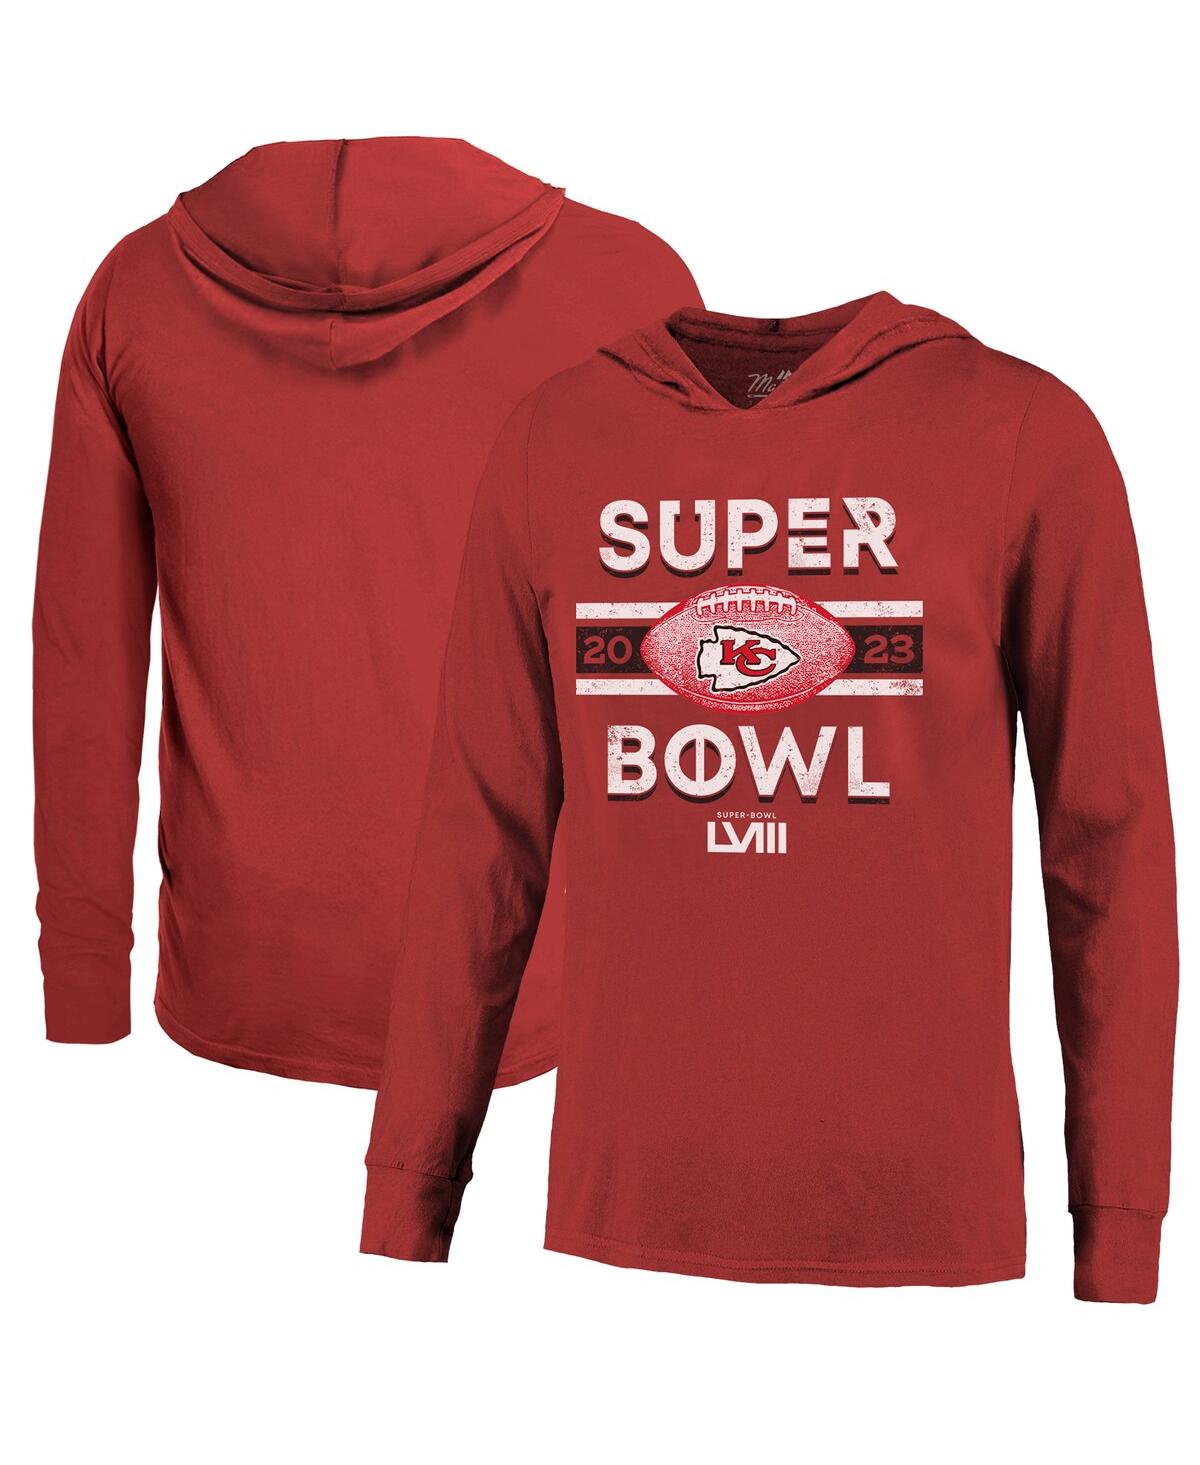 Men's Majestic Threads Red Distressed Kansas City Chiefs Super Bowl Lviii Tri-Blend Soft Hand Long Sleeve Hoodie T-shirt - Red